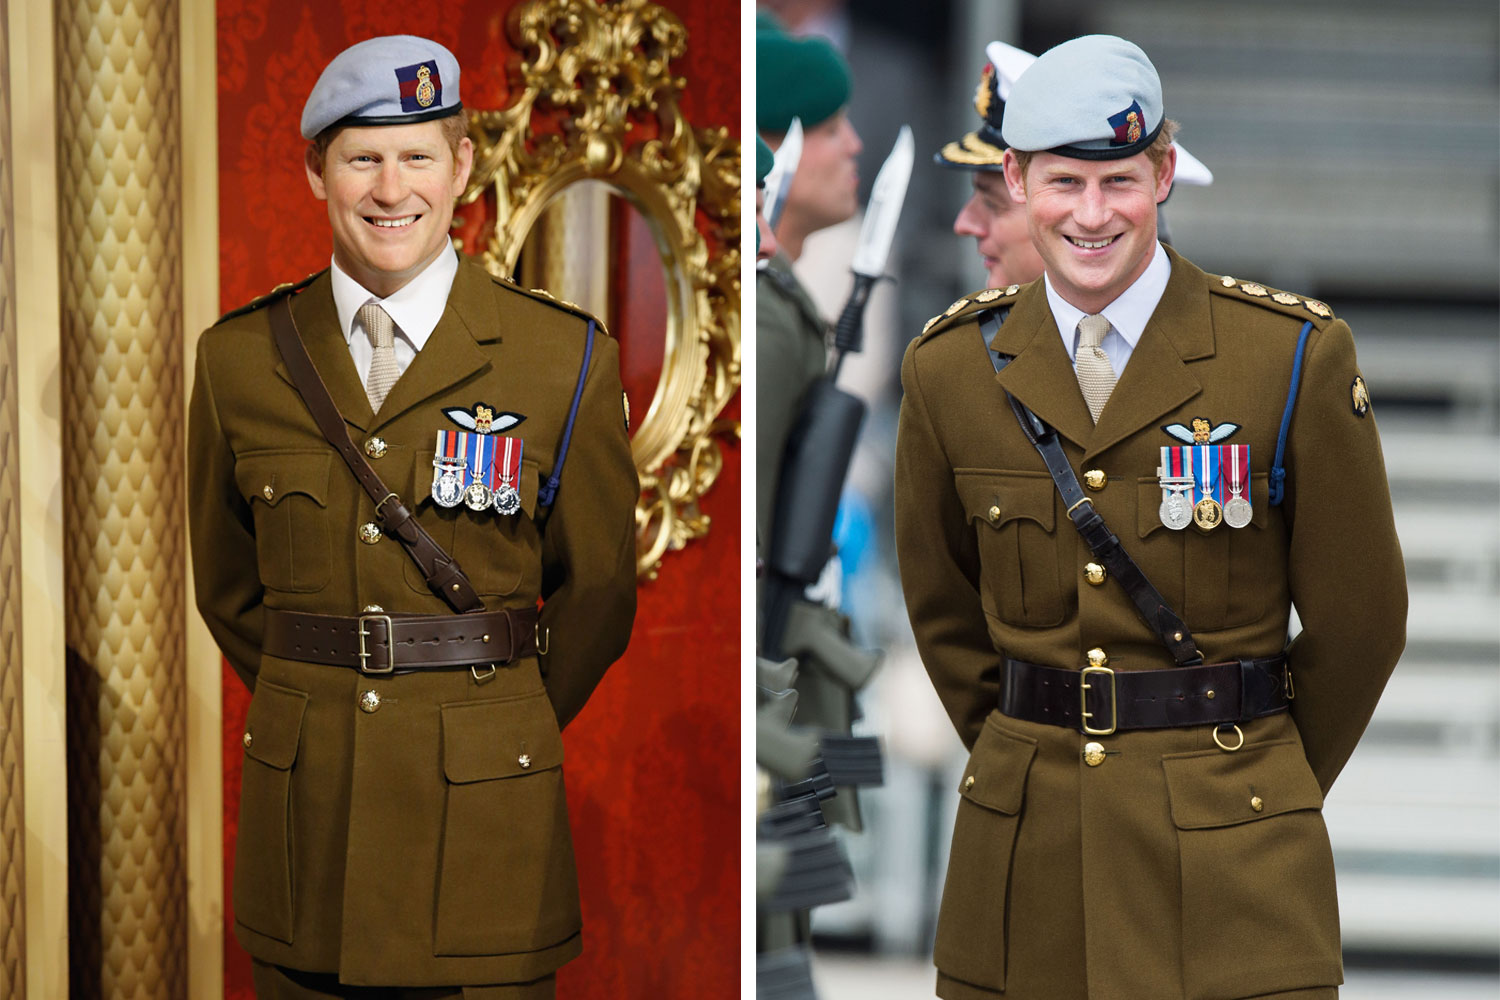 Left: A Madame Tussauds wax figure of Prince Harry at Madame Tussauds New York City on Oct. 23, 2014 in New York City. RIght: Prince Harry visits The Royal Marines Tamar on Aug. 2, 2013 in Devonport, England.